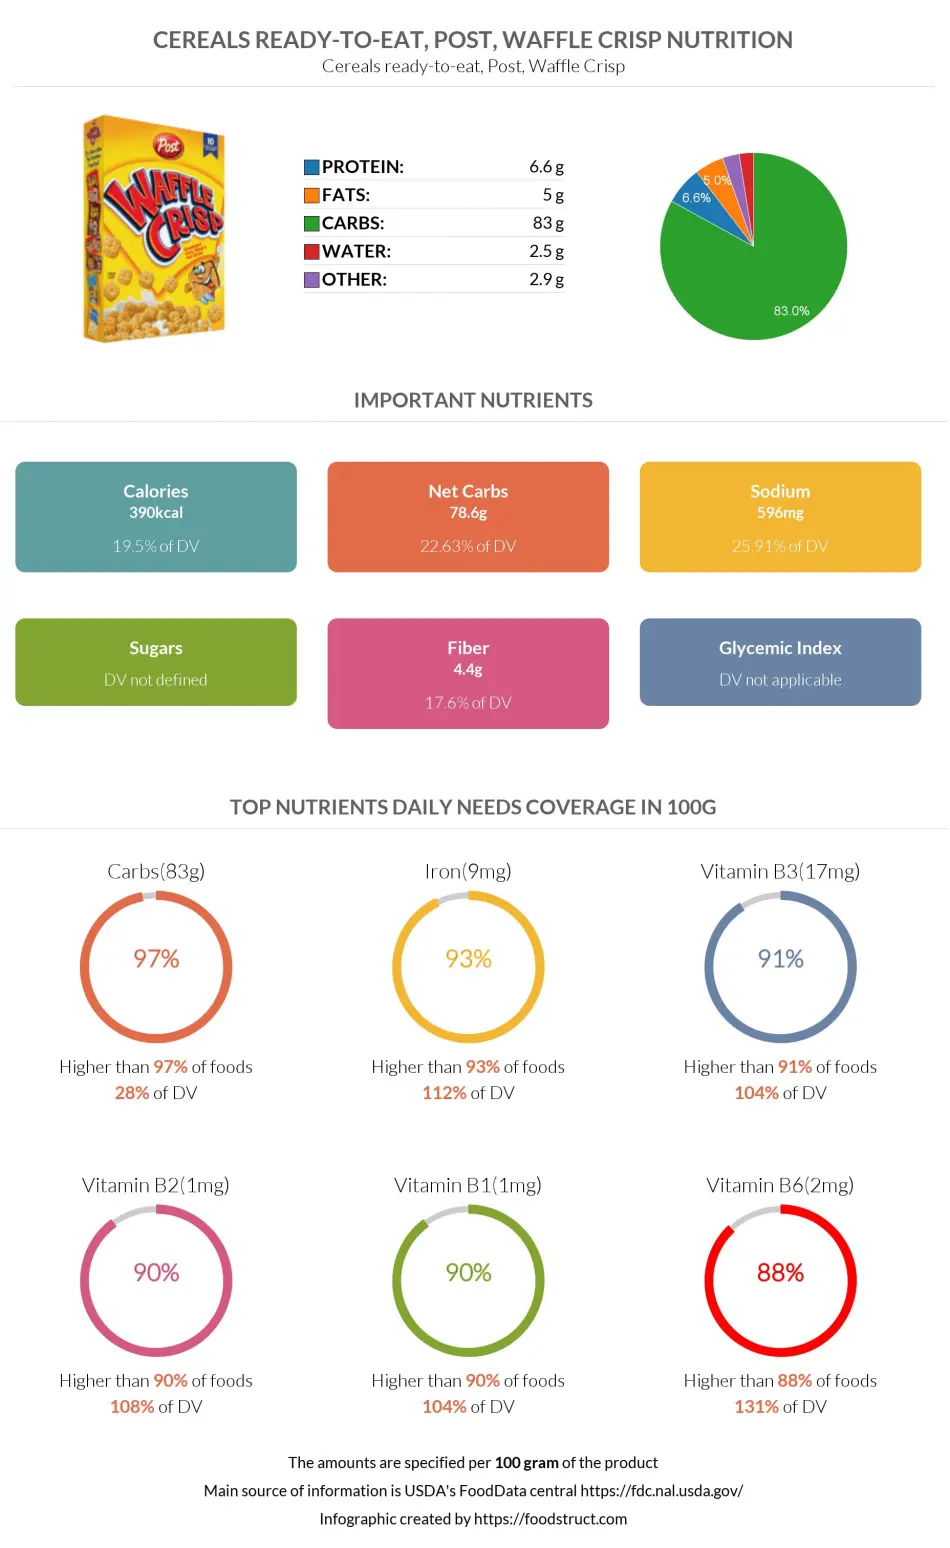 Cereals ready-to-eat, Post, Waffle Crisp nutrition infographic